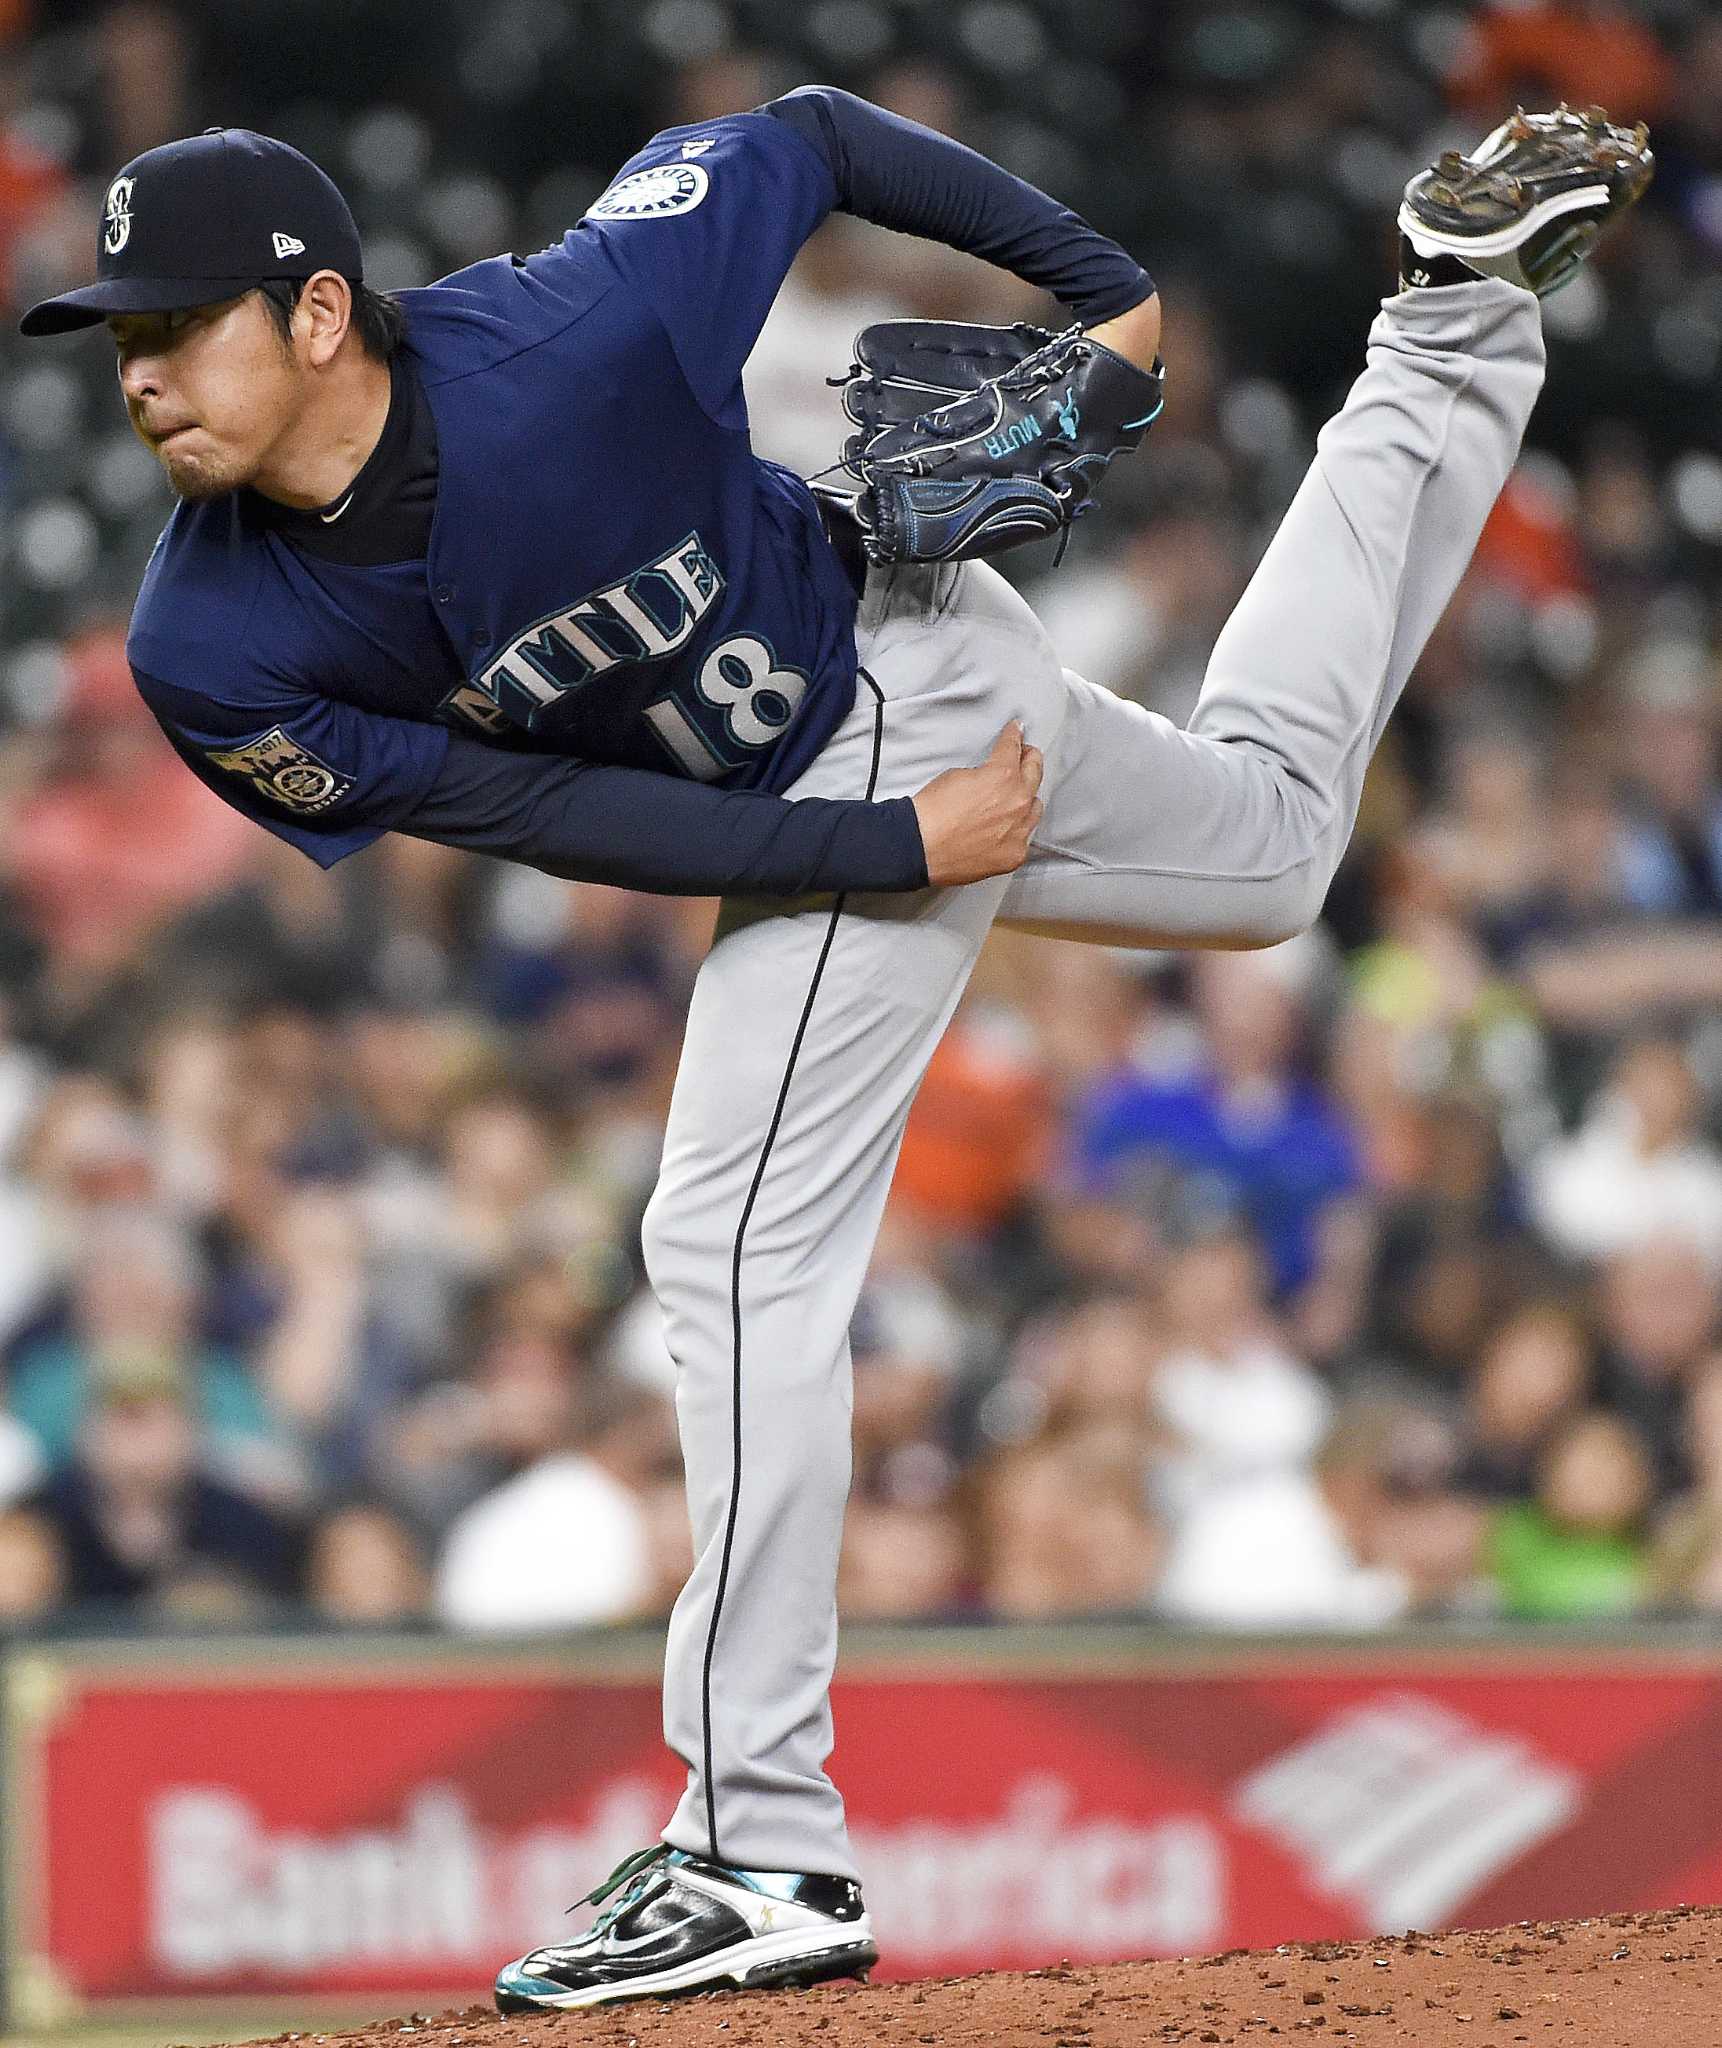 Hisashi Iwakuma Joins Mariners As Special Assignment Coach, by Mariners PR